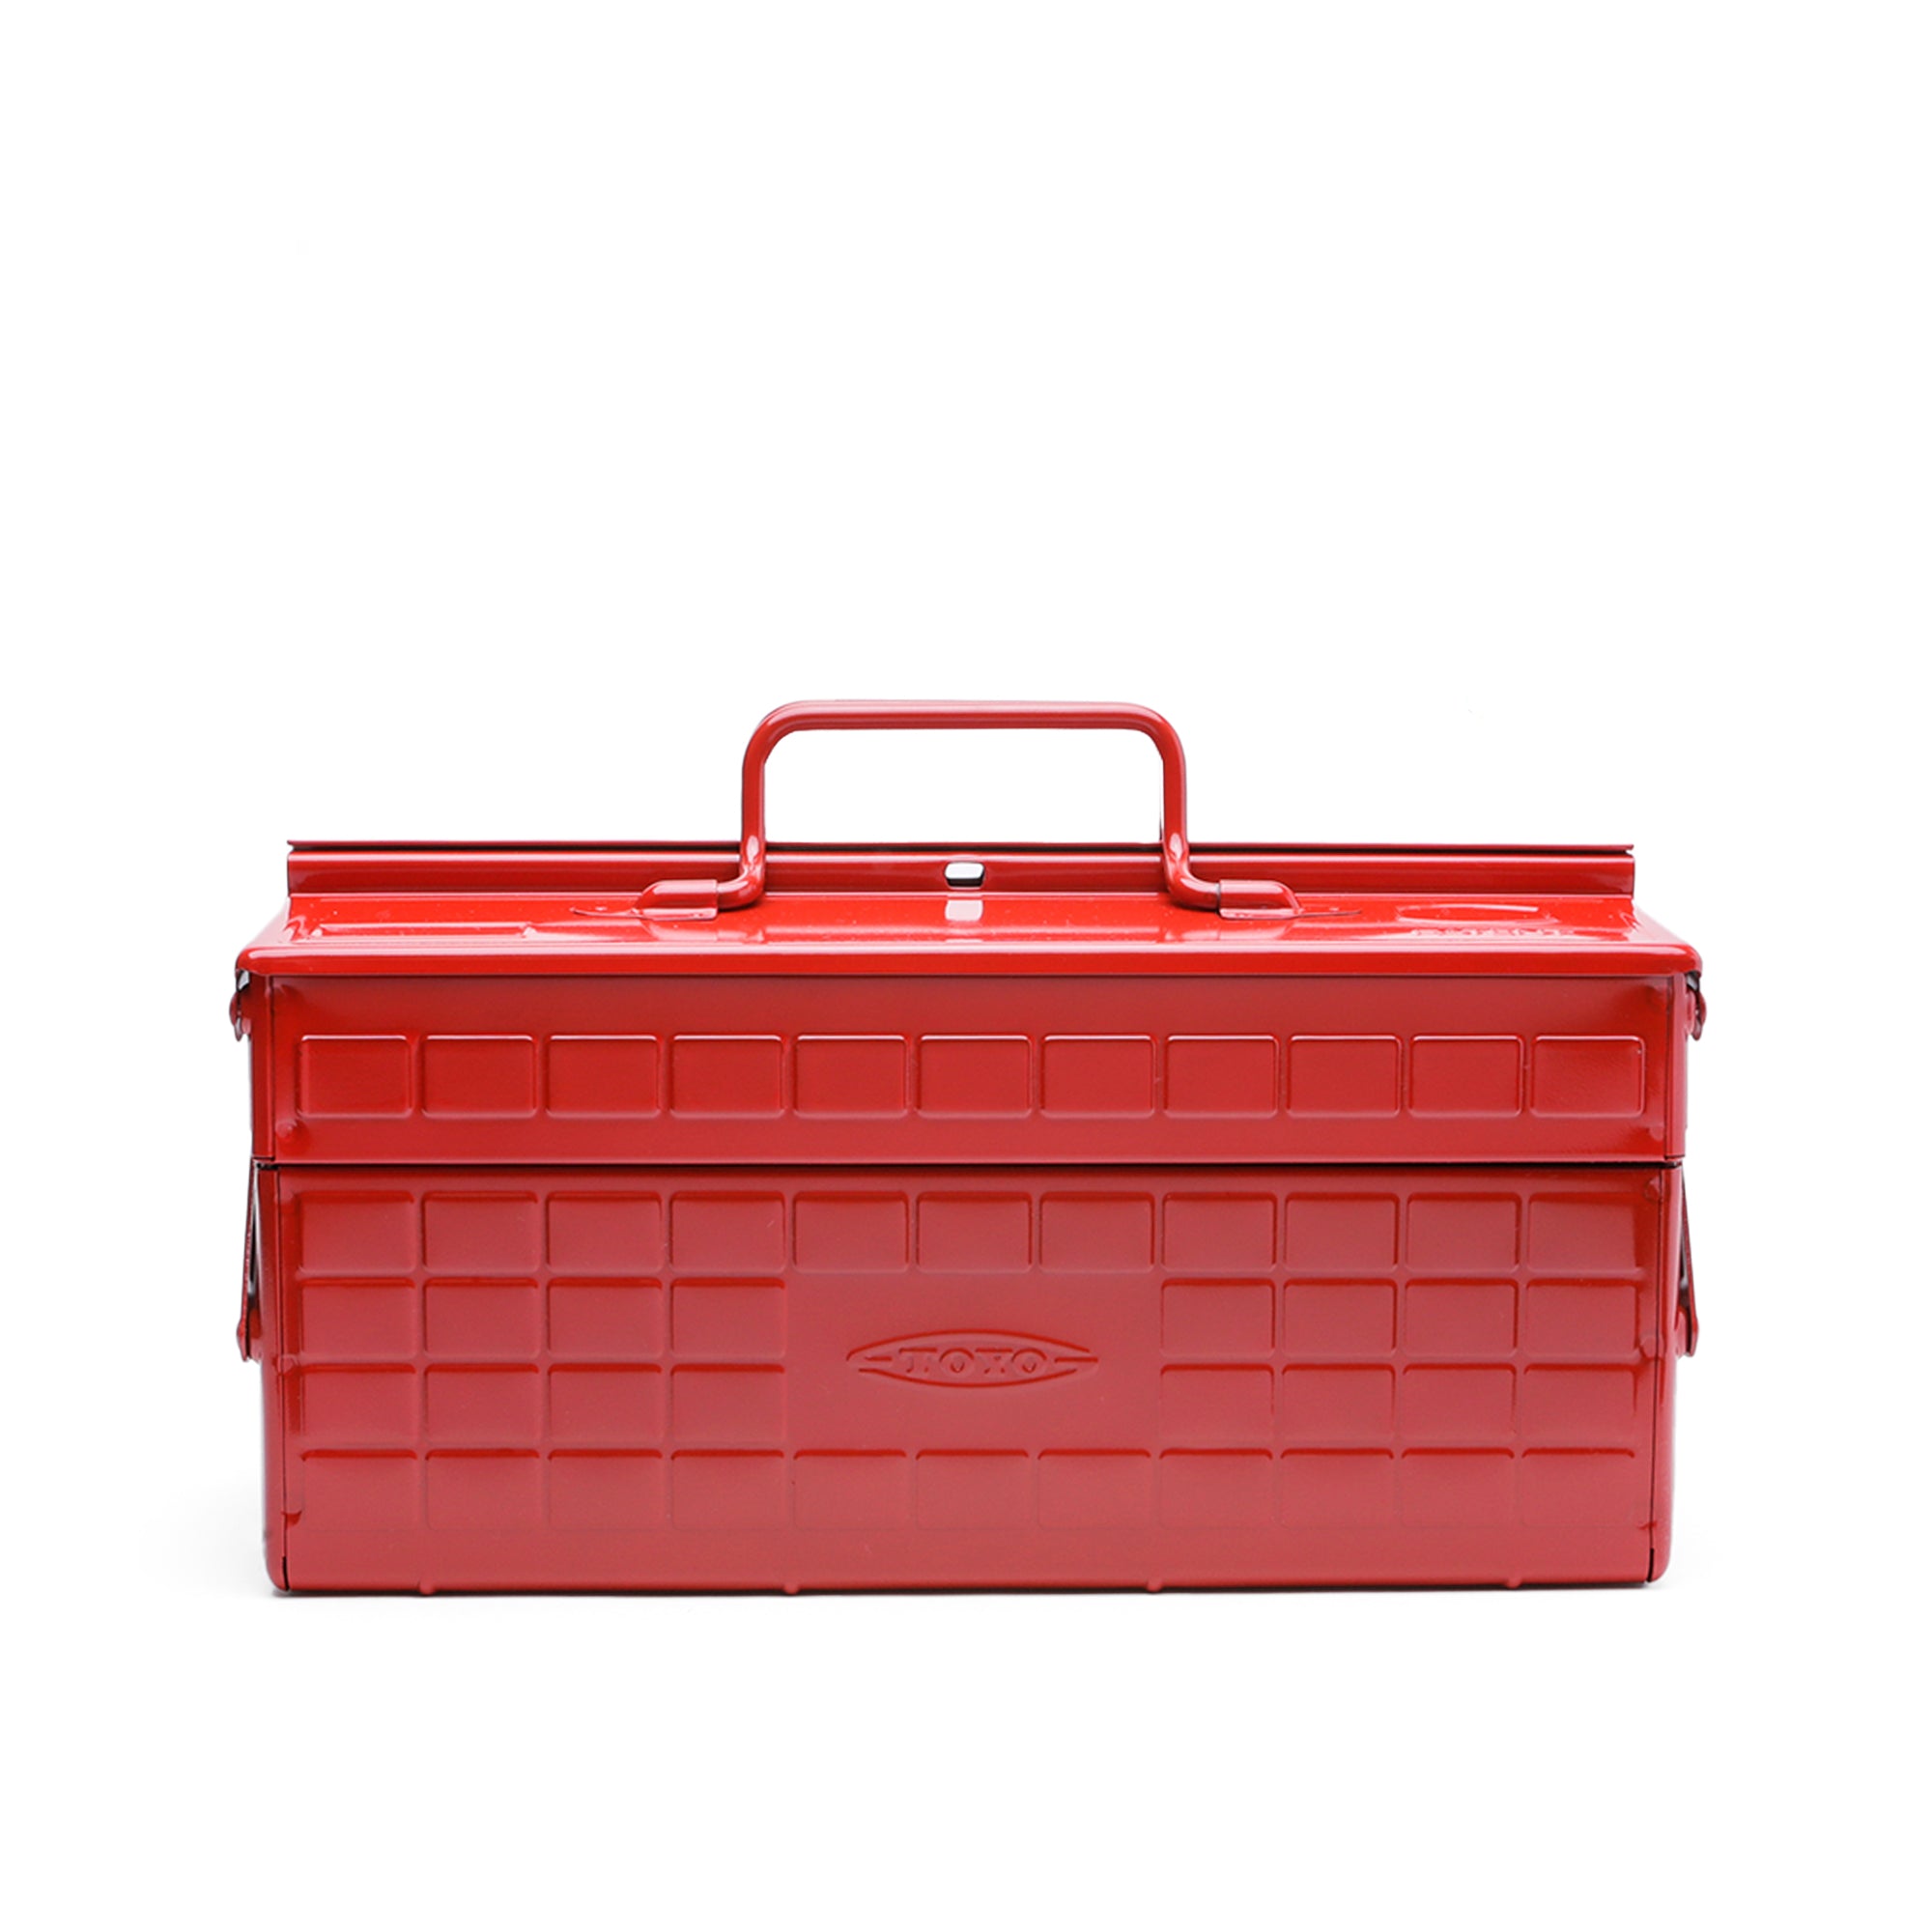 Red Toyo Steel Toolbox | Cantilever Lid | Upper Storage Trays, Style ST-350